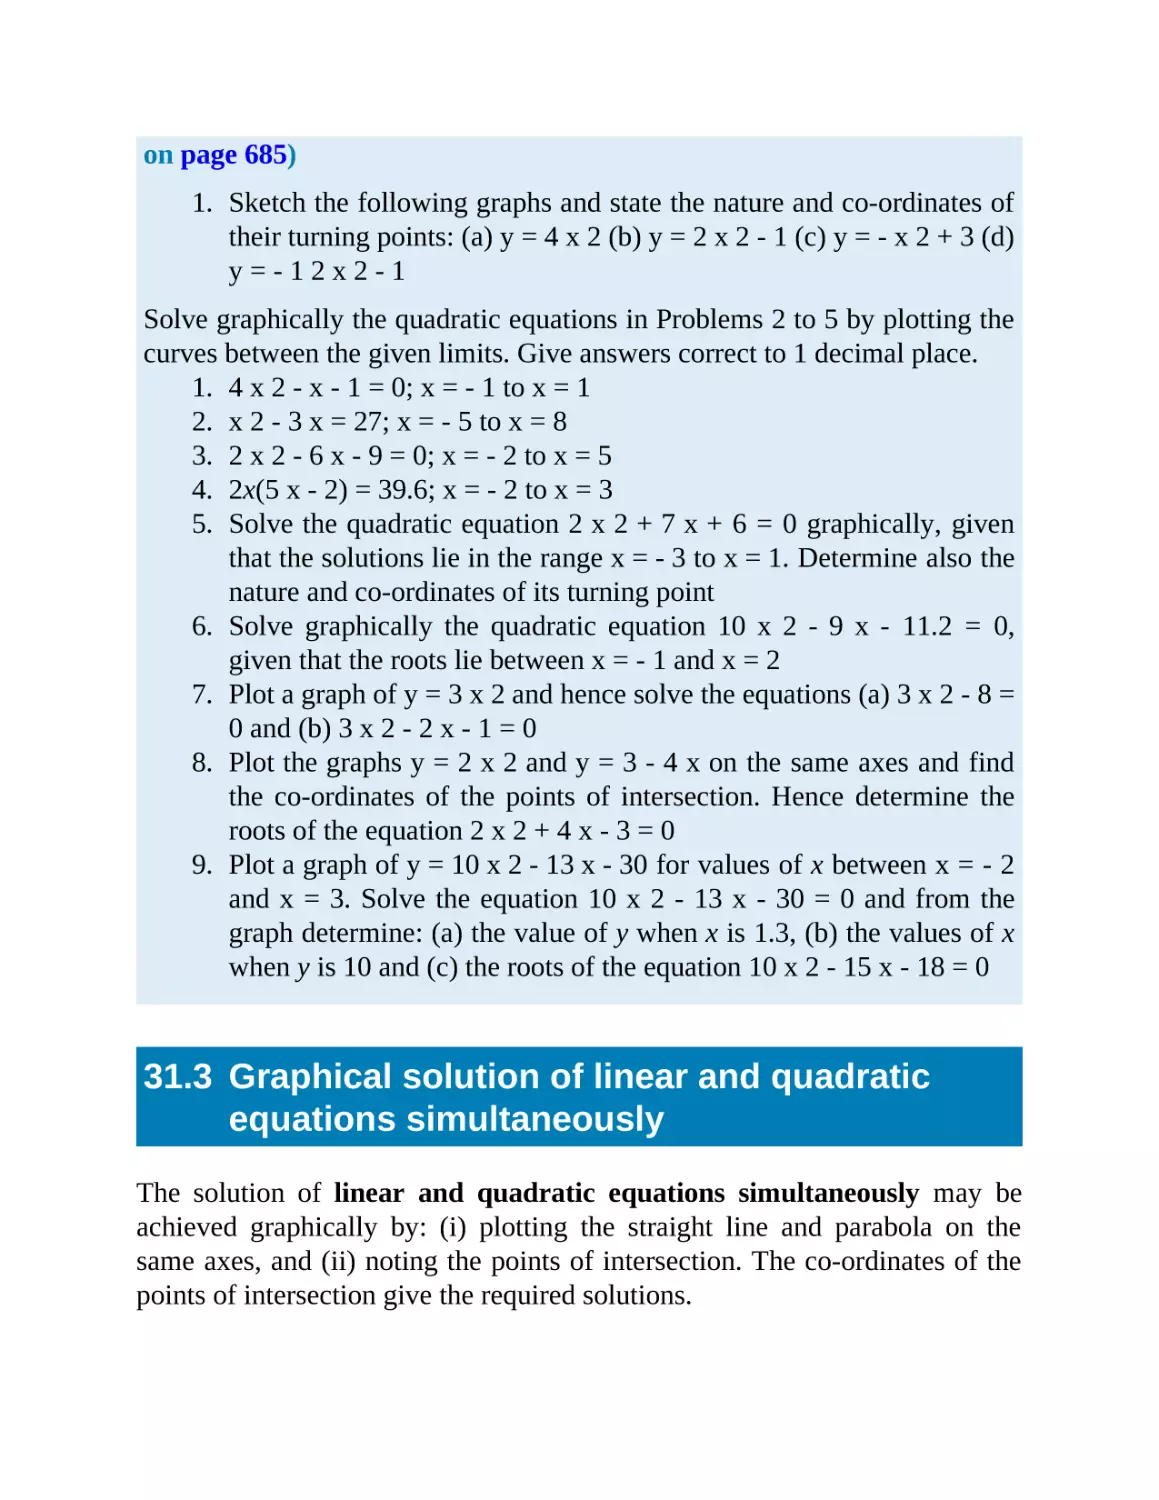 31.3 Graphical solution of linear and quadratic equations simultaneously